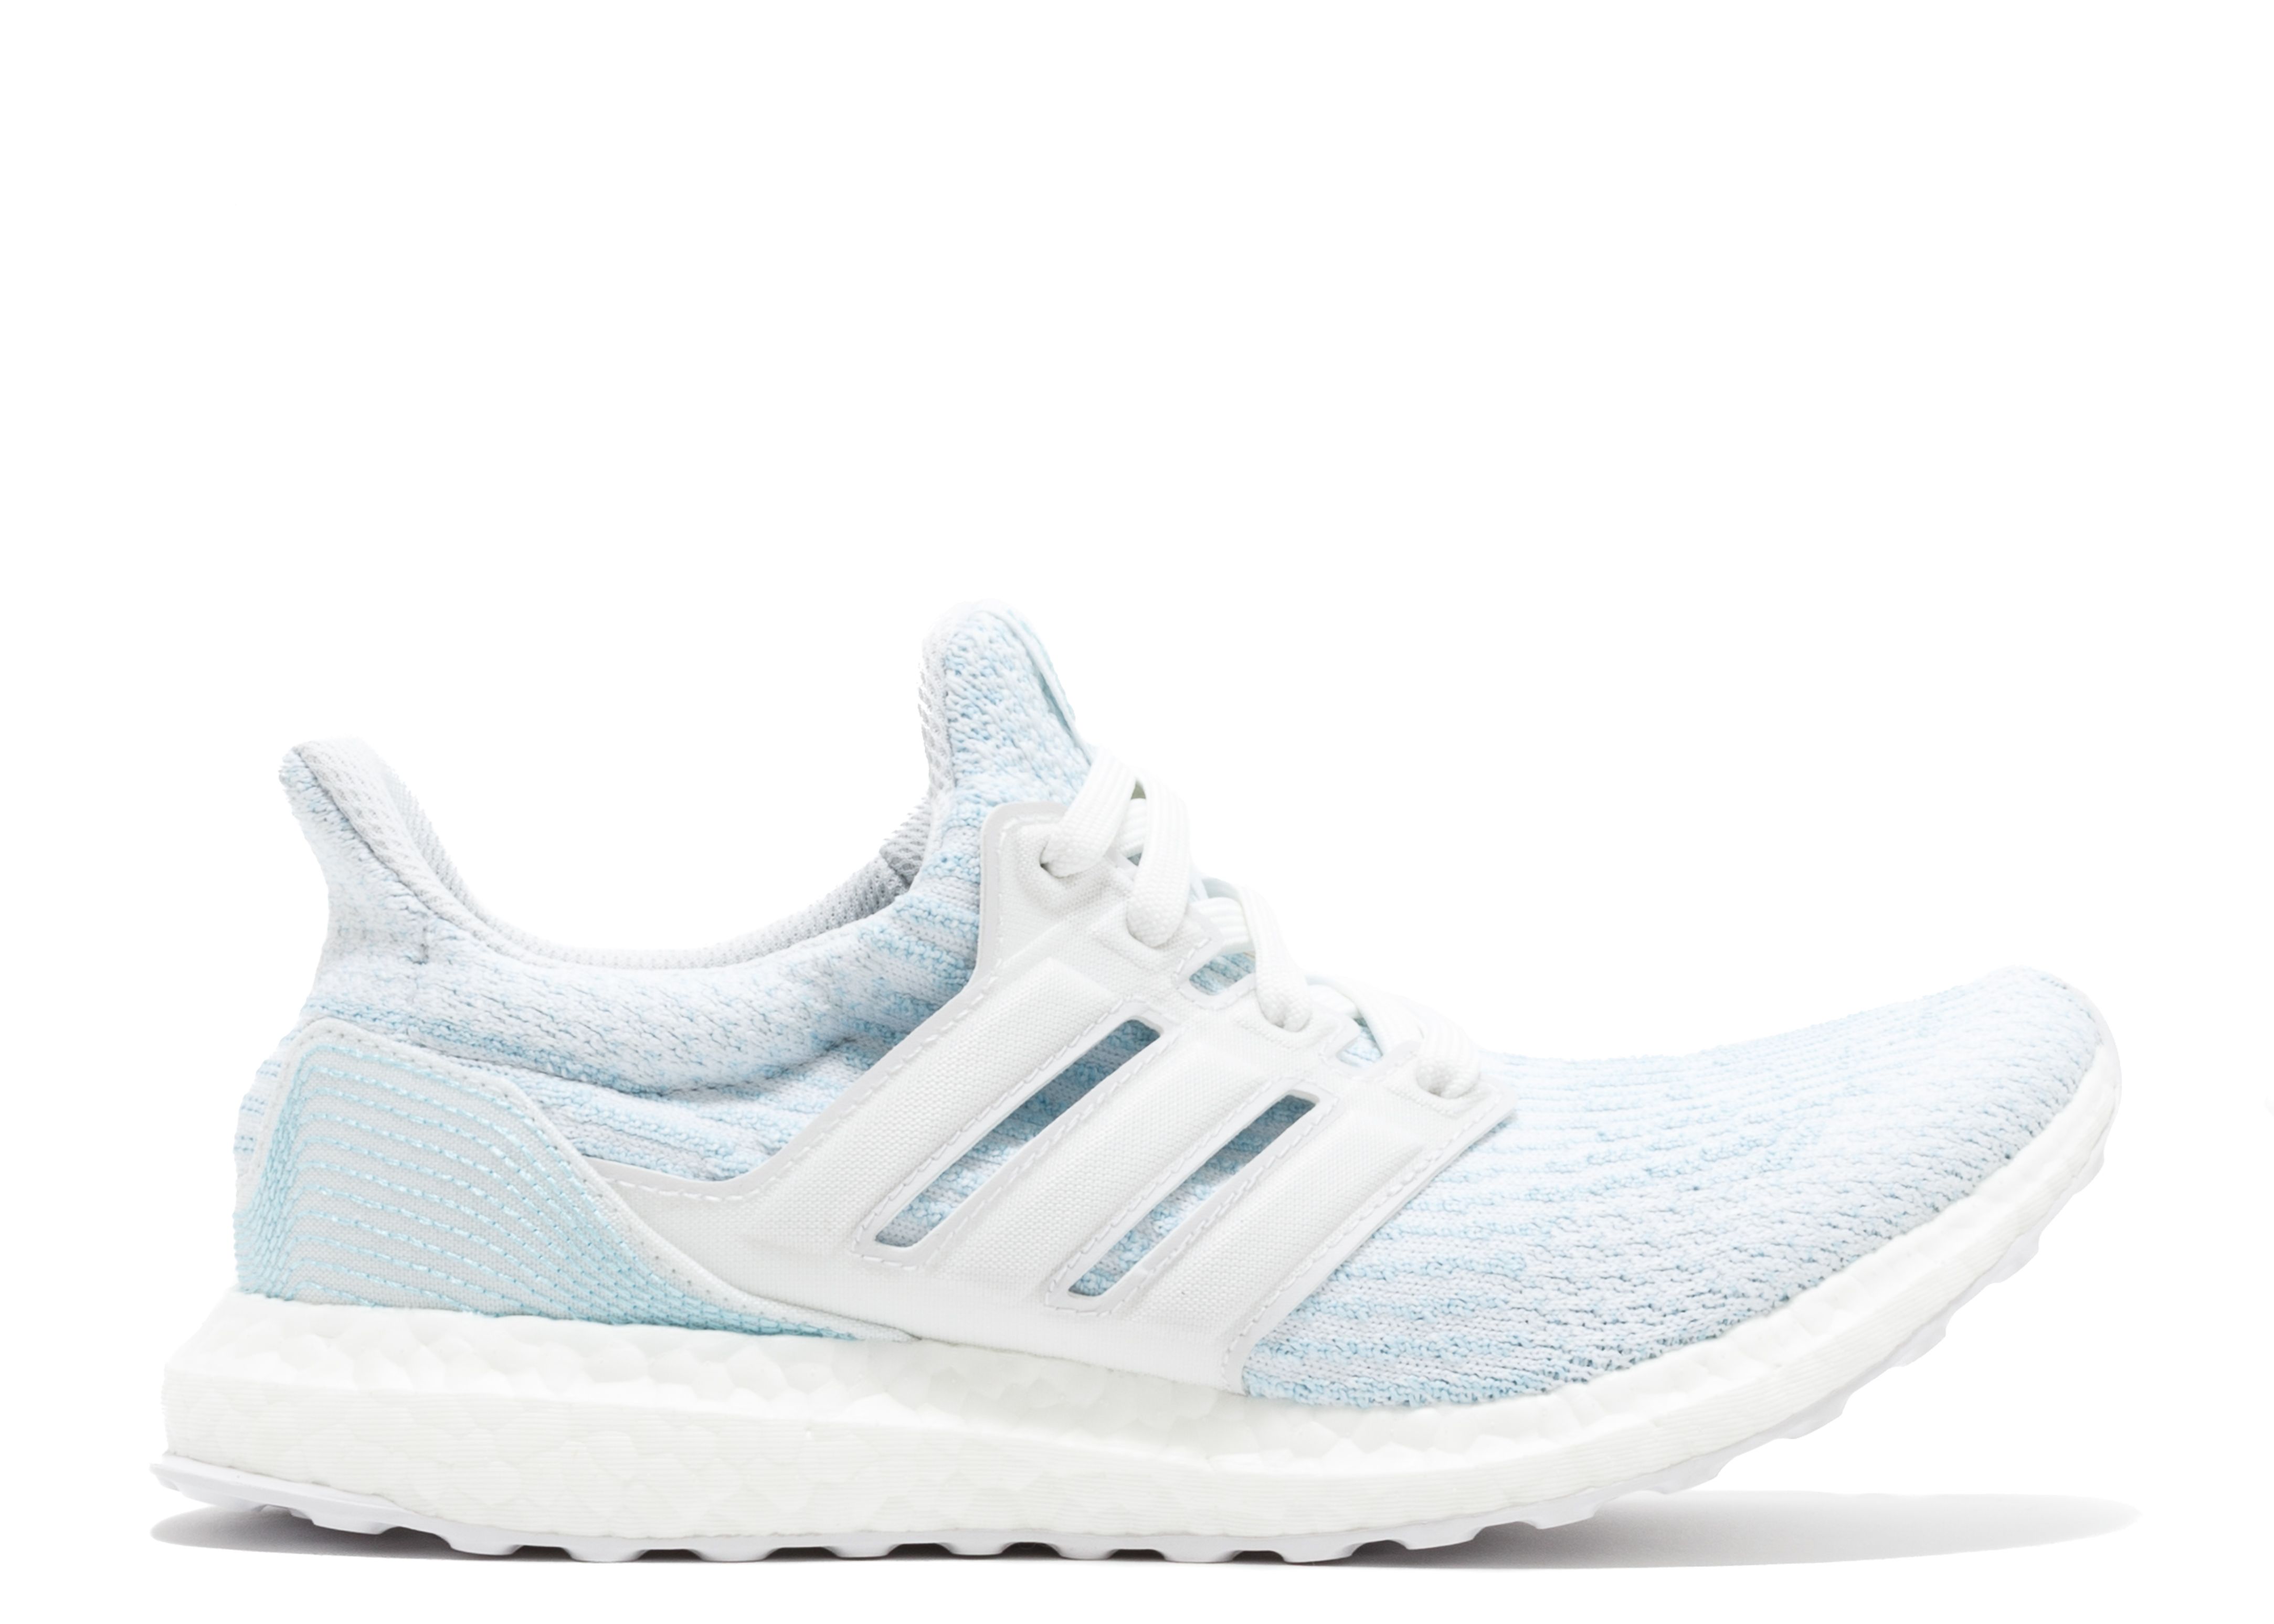 Parley X UltraBoost 3.0 Limited 'Icey 